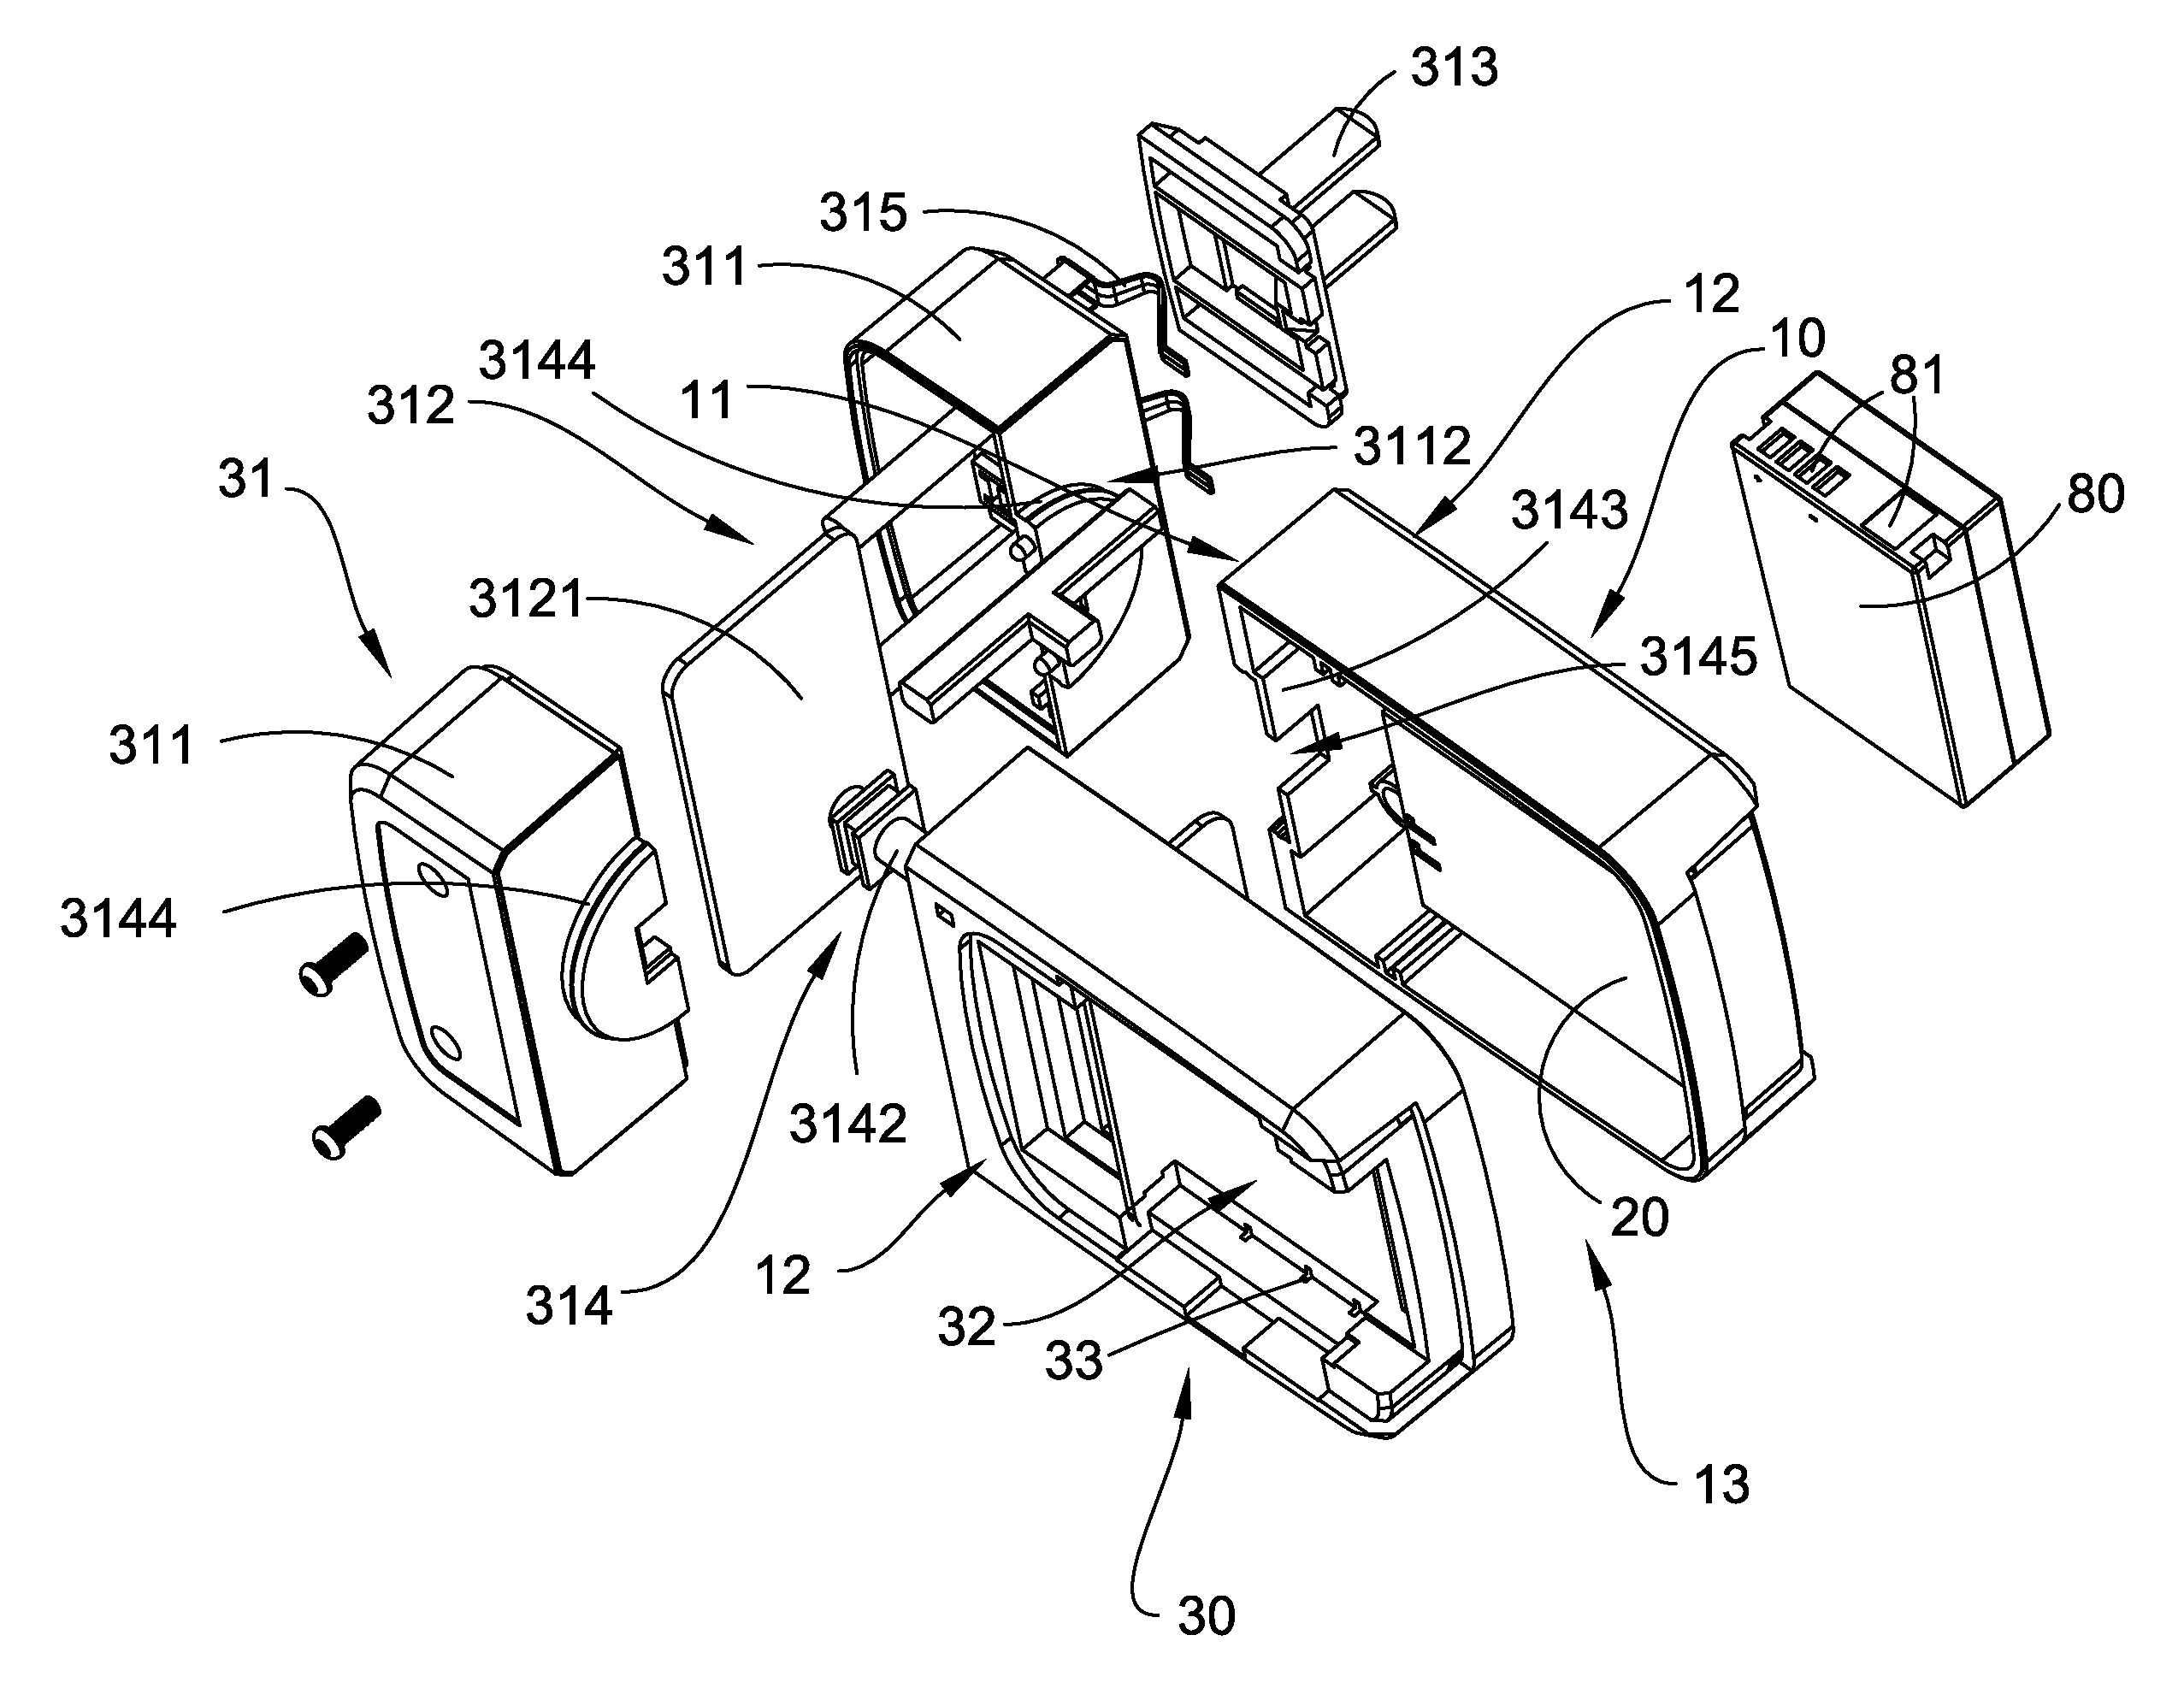 Charger with Multi-sided Arrangement